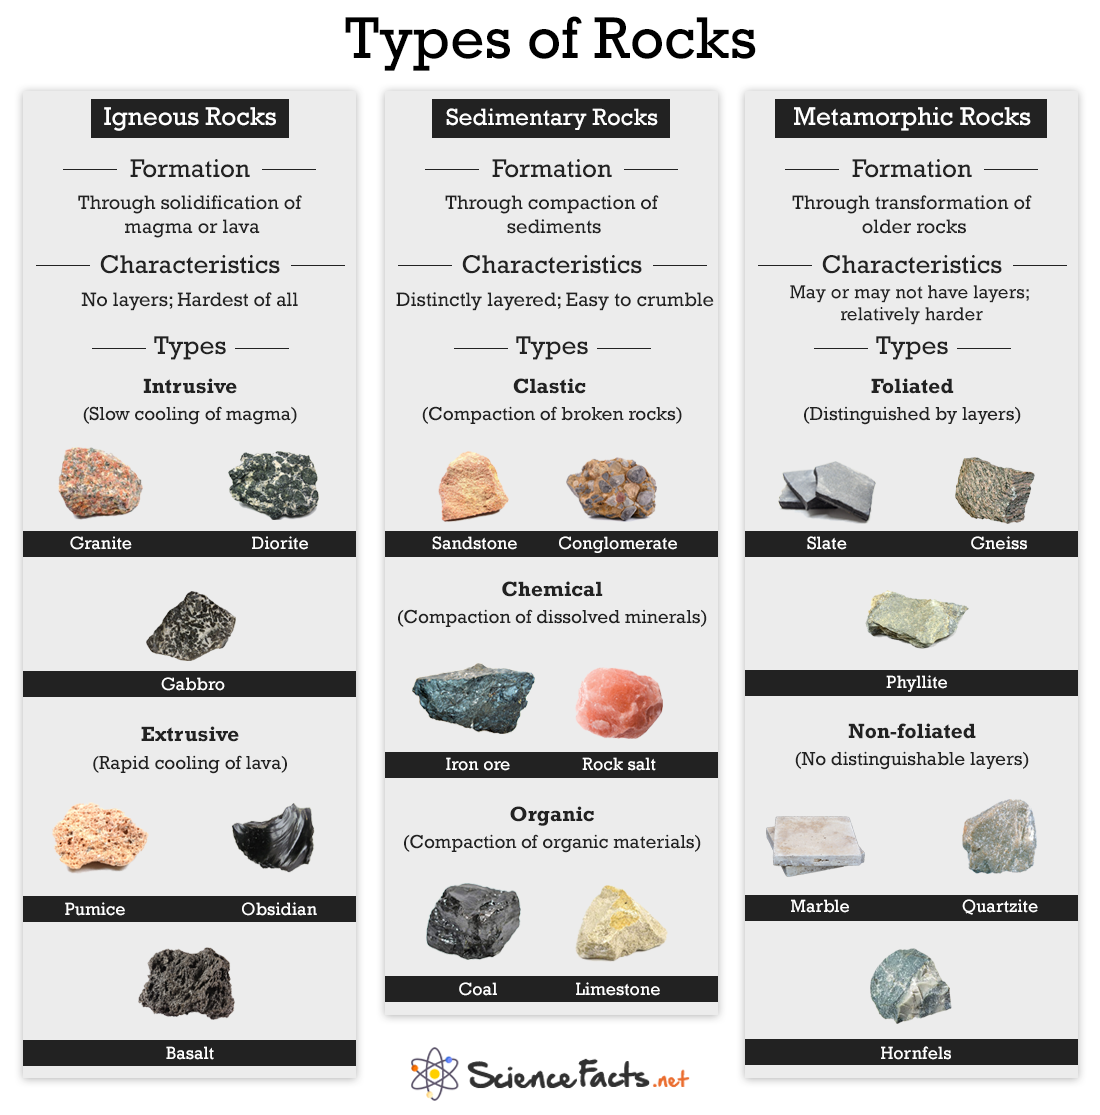 essay about types of rocks